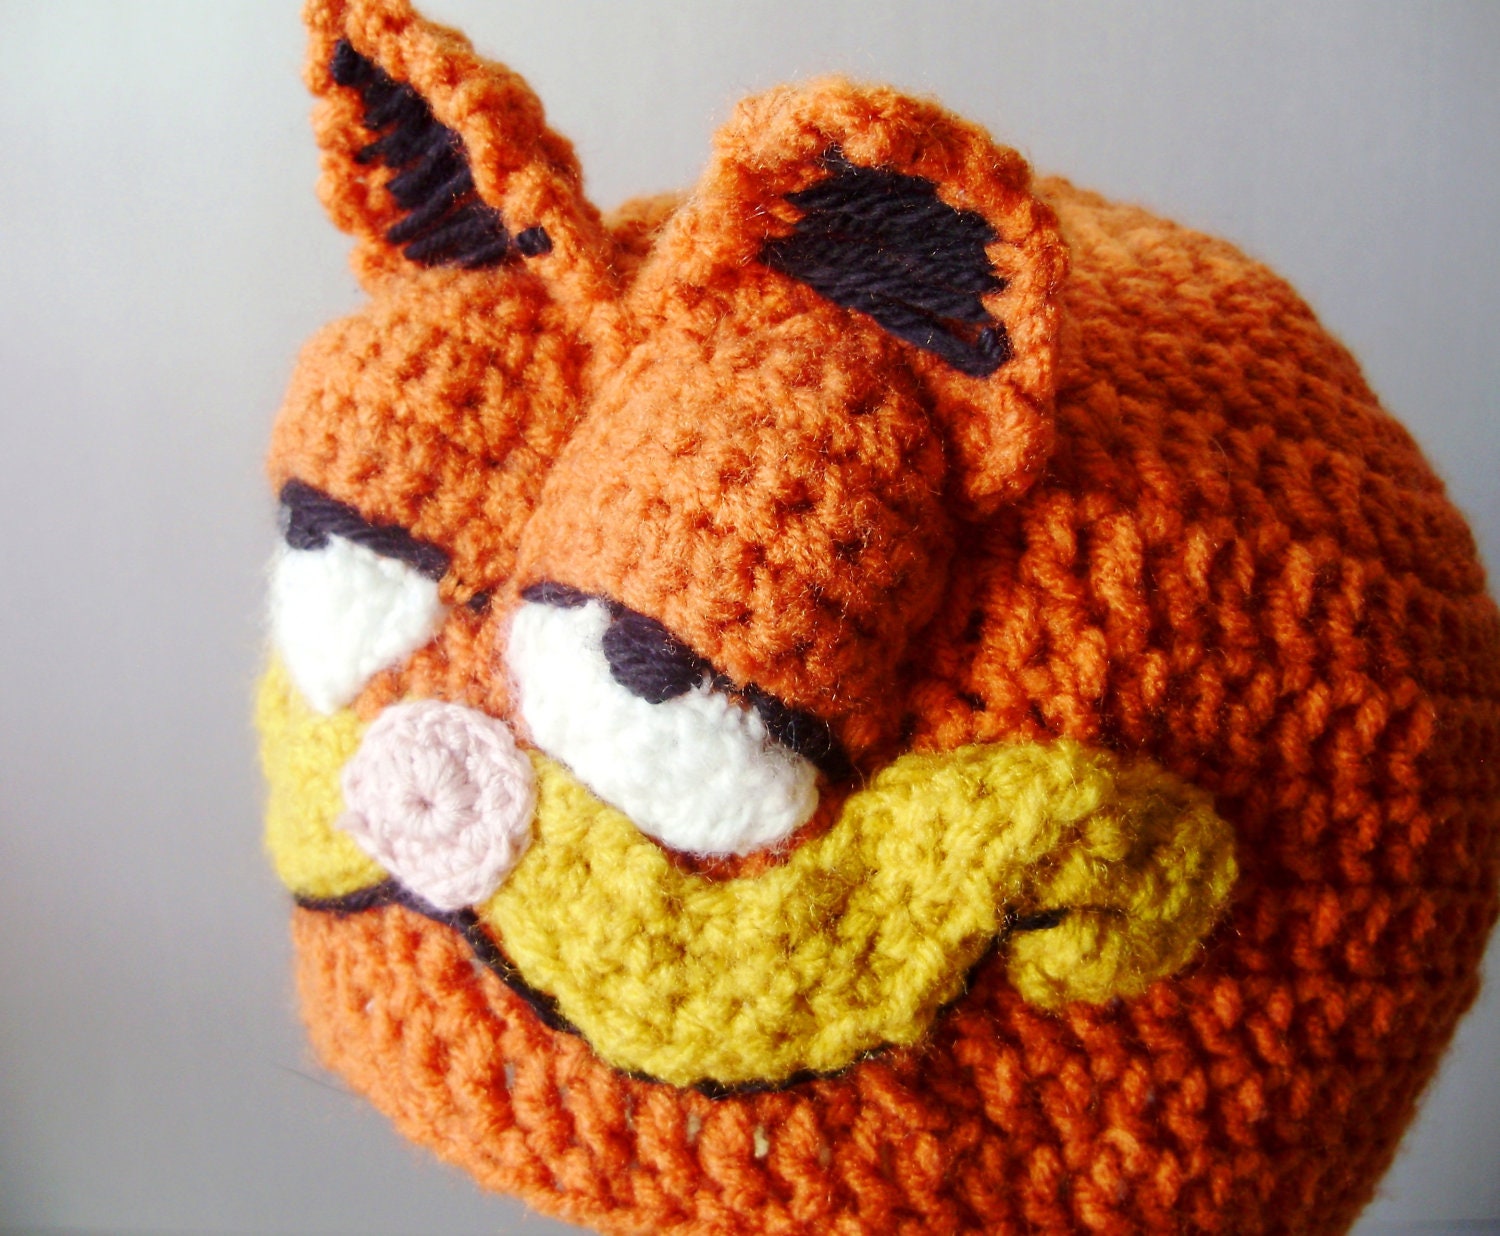 Crochet Hat - Retro Cartoon 3-D Cat Hat in Bright Orange with Ears and Snout for Children - Silly and Chunky Crochet Hat